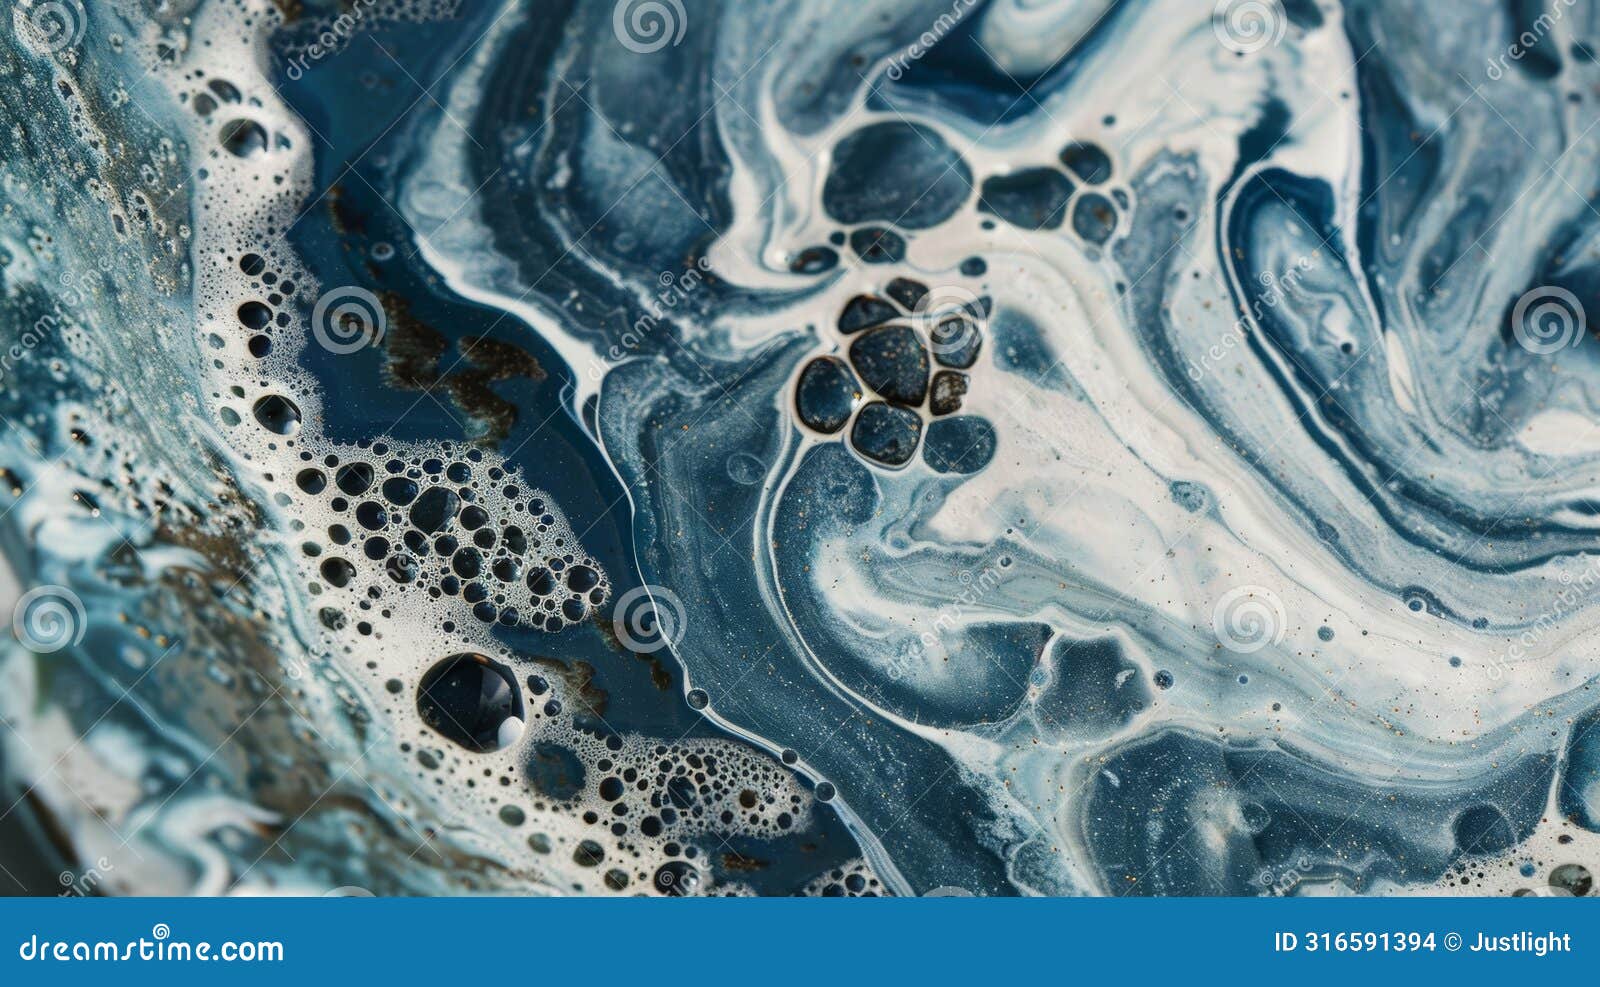 a ceramic plate showcasing a unique marbling effect achieved through the swirling technique.